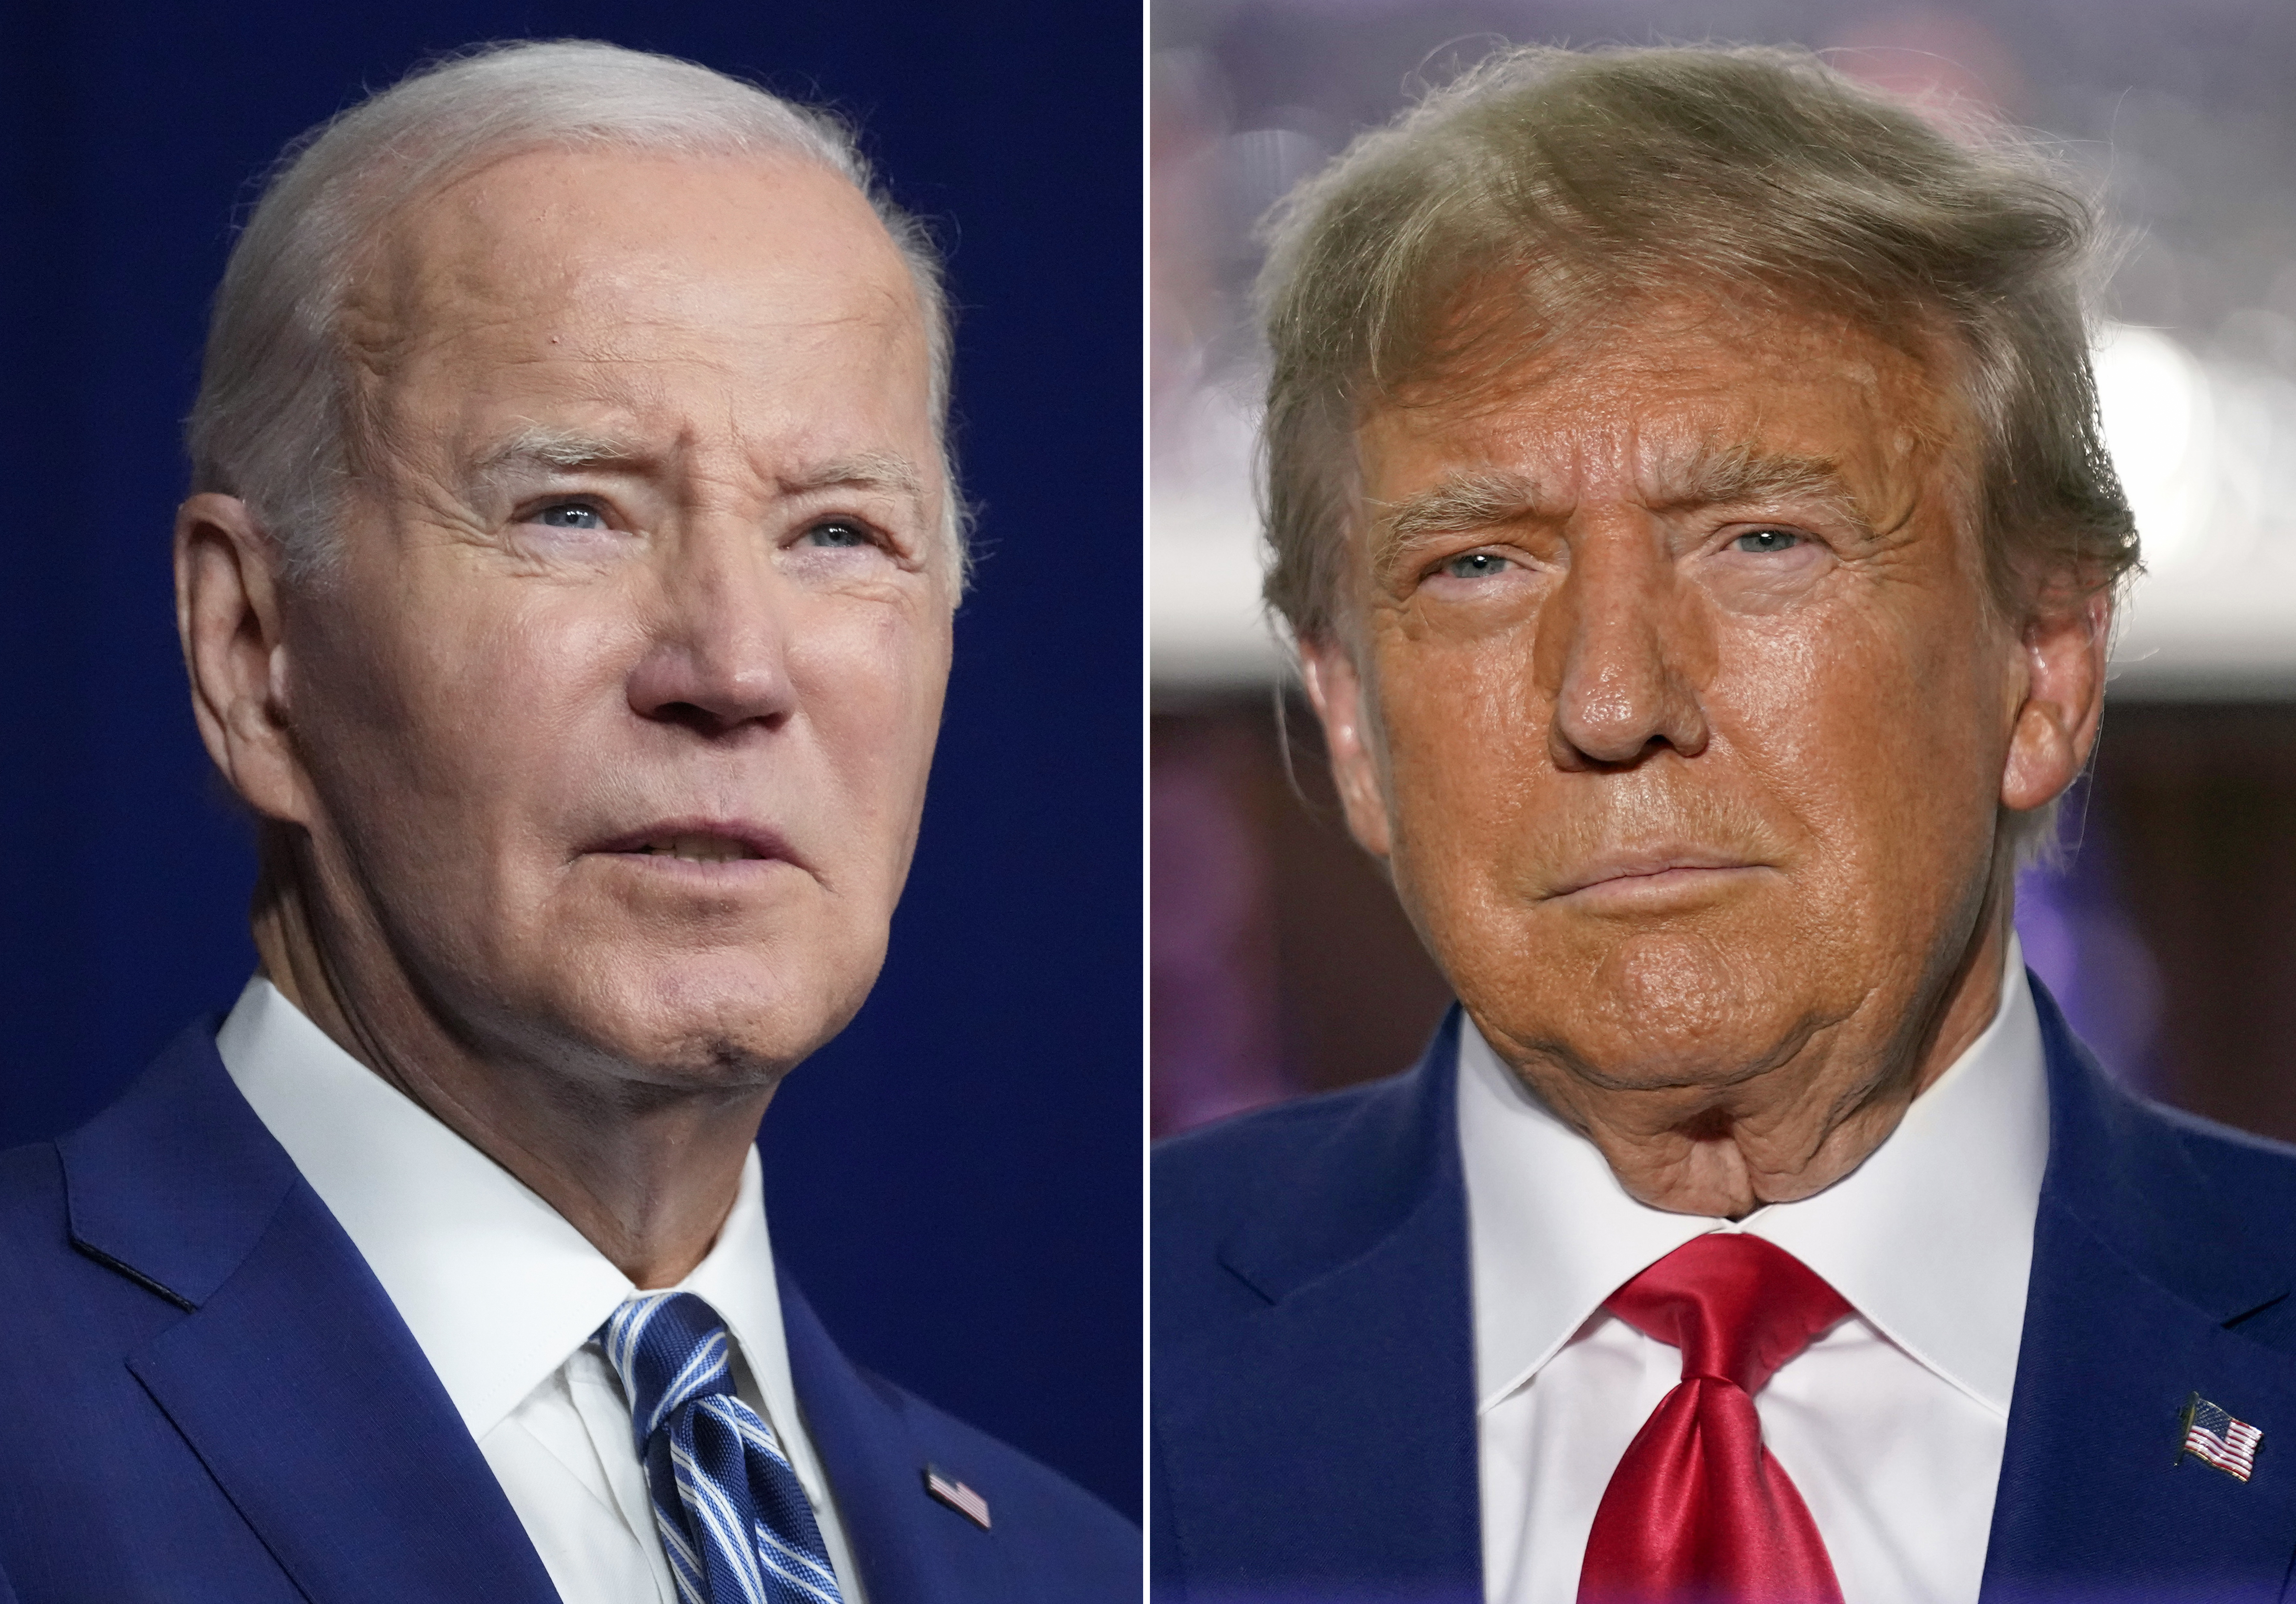 Biden's wobbly campaign, now in 'freakout' mode, needs Trump convicted